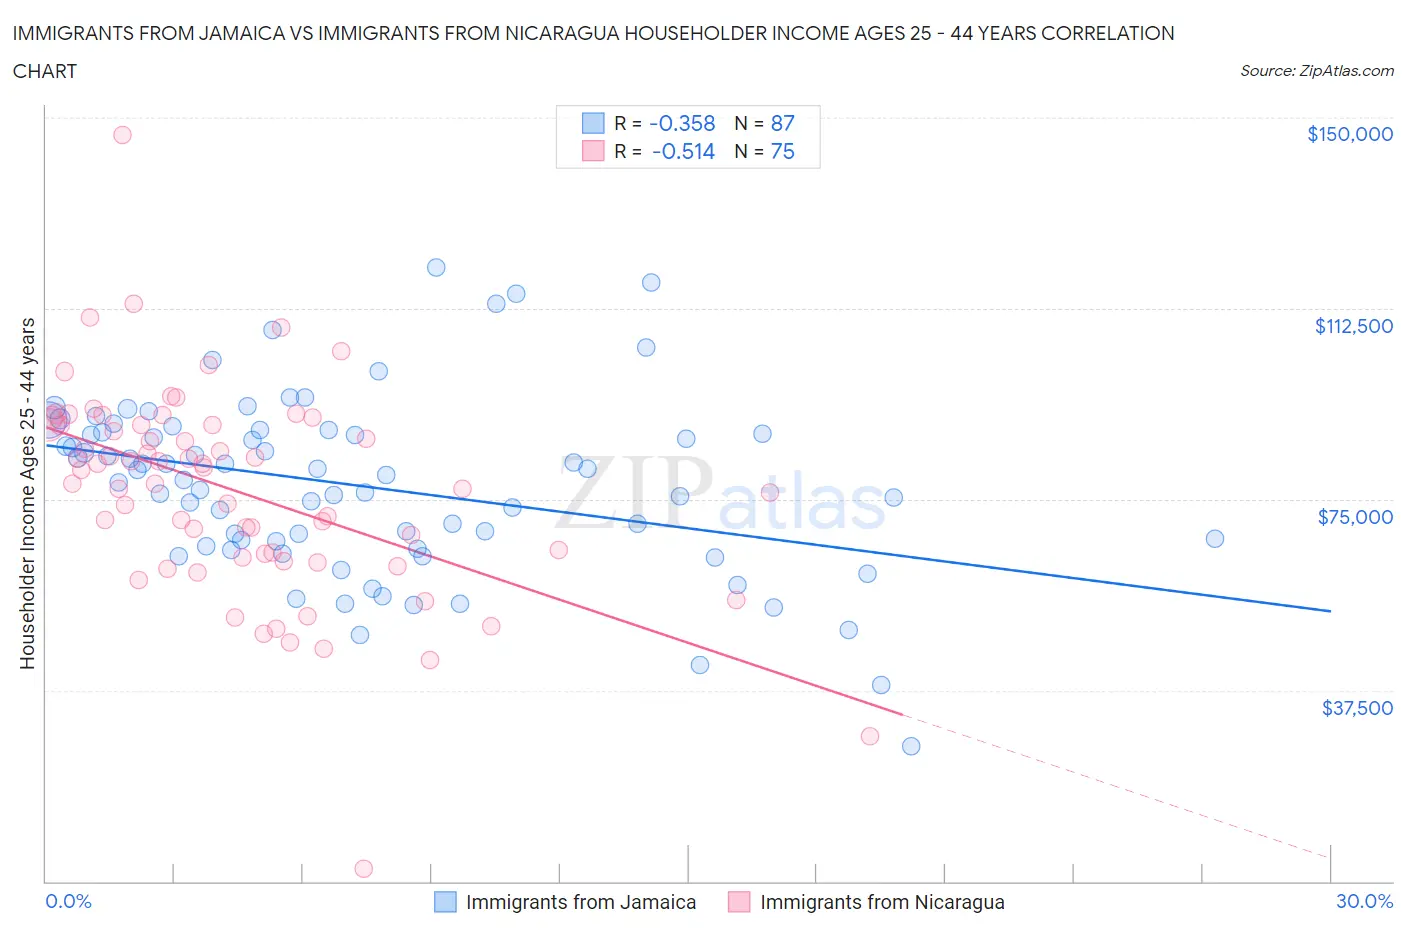 Immigrants from Jamaica vs Immigrants from Nicaragua Householder Income Ages 25 - 44 years